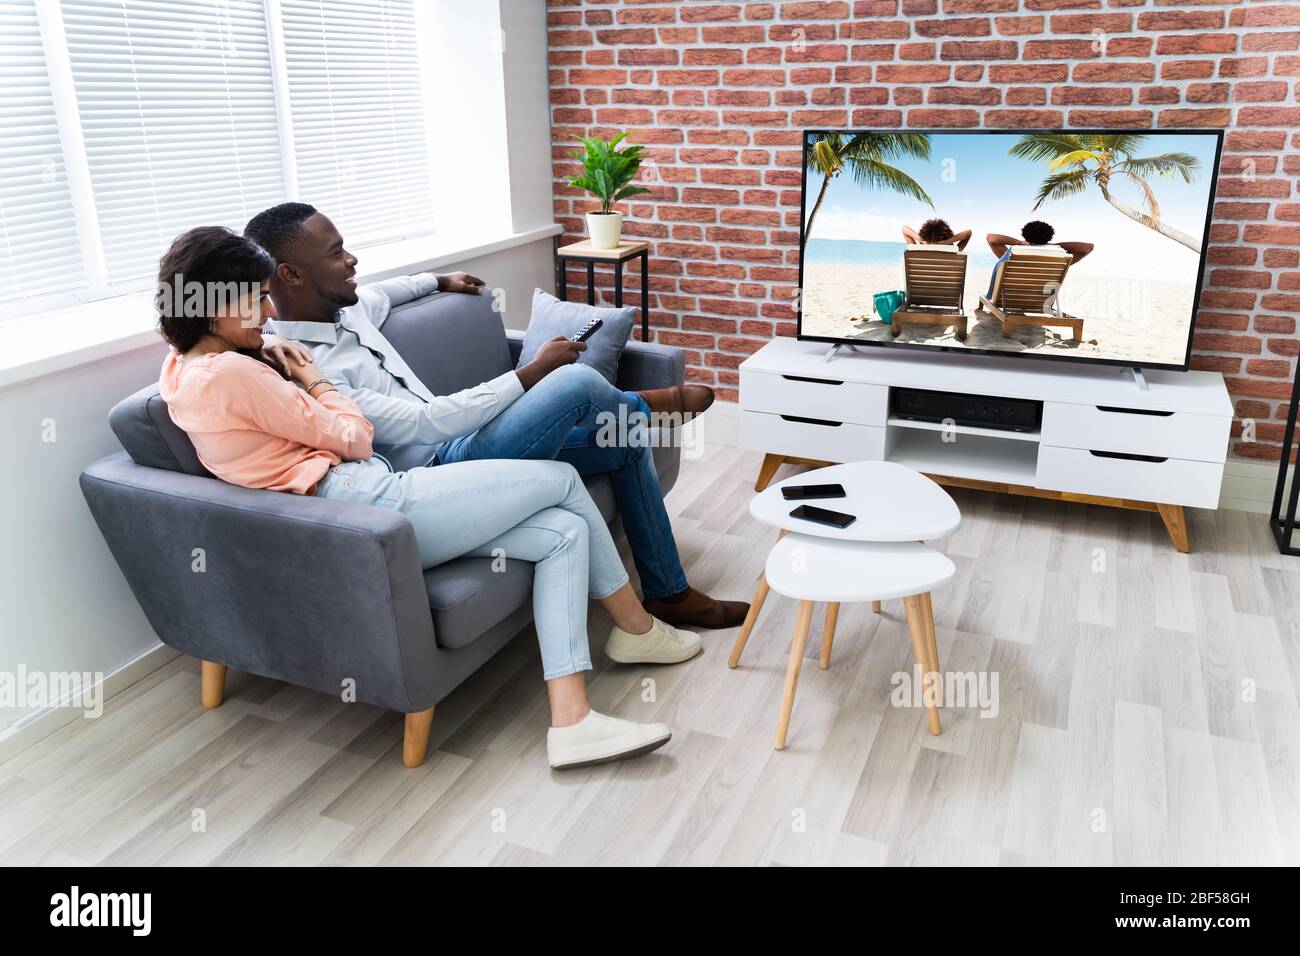 Rear View Of A Couple Watching Movie On Television At Home Stock Photo